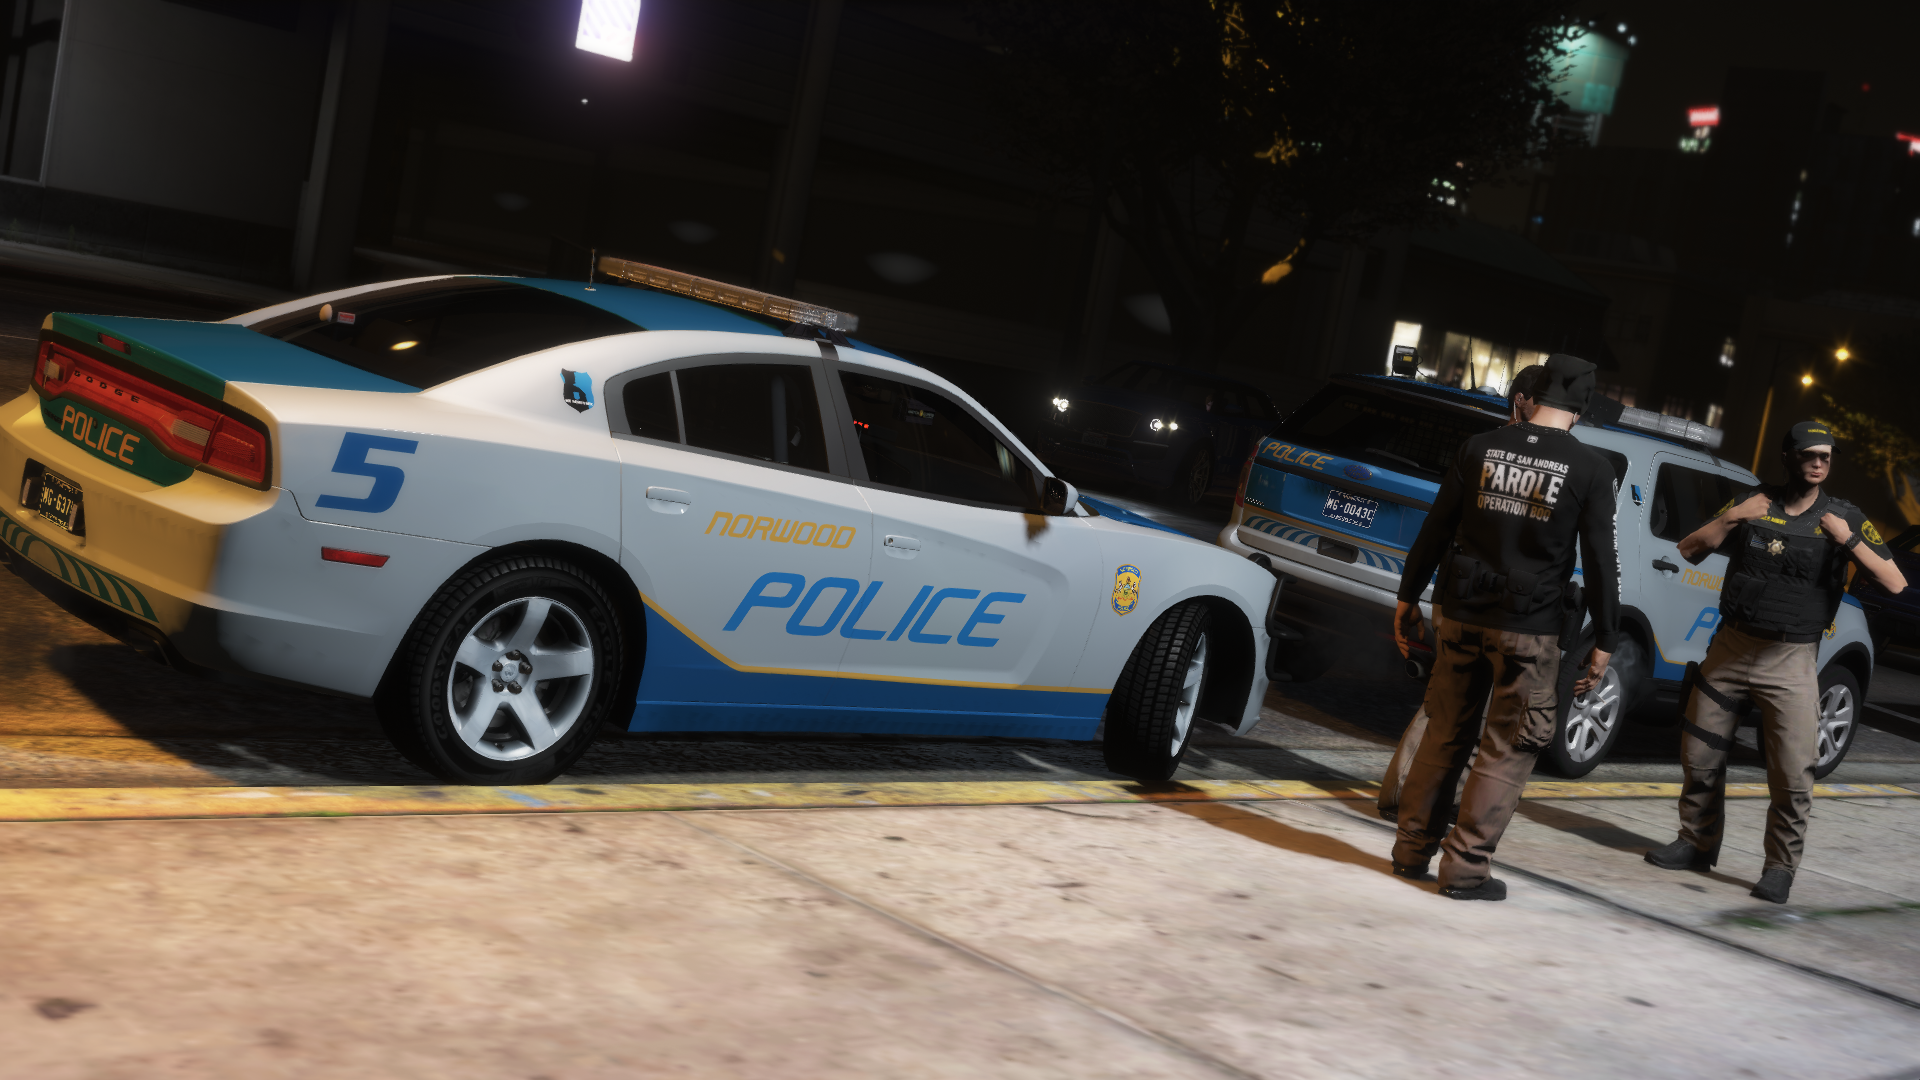 Grand_Theft_Auto_V_10_17_2019_11_44_30_PM.png.7c93bac3975d145dc55d2a21da5cd85c.png